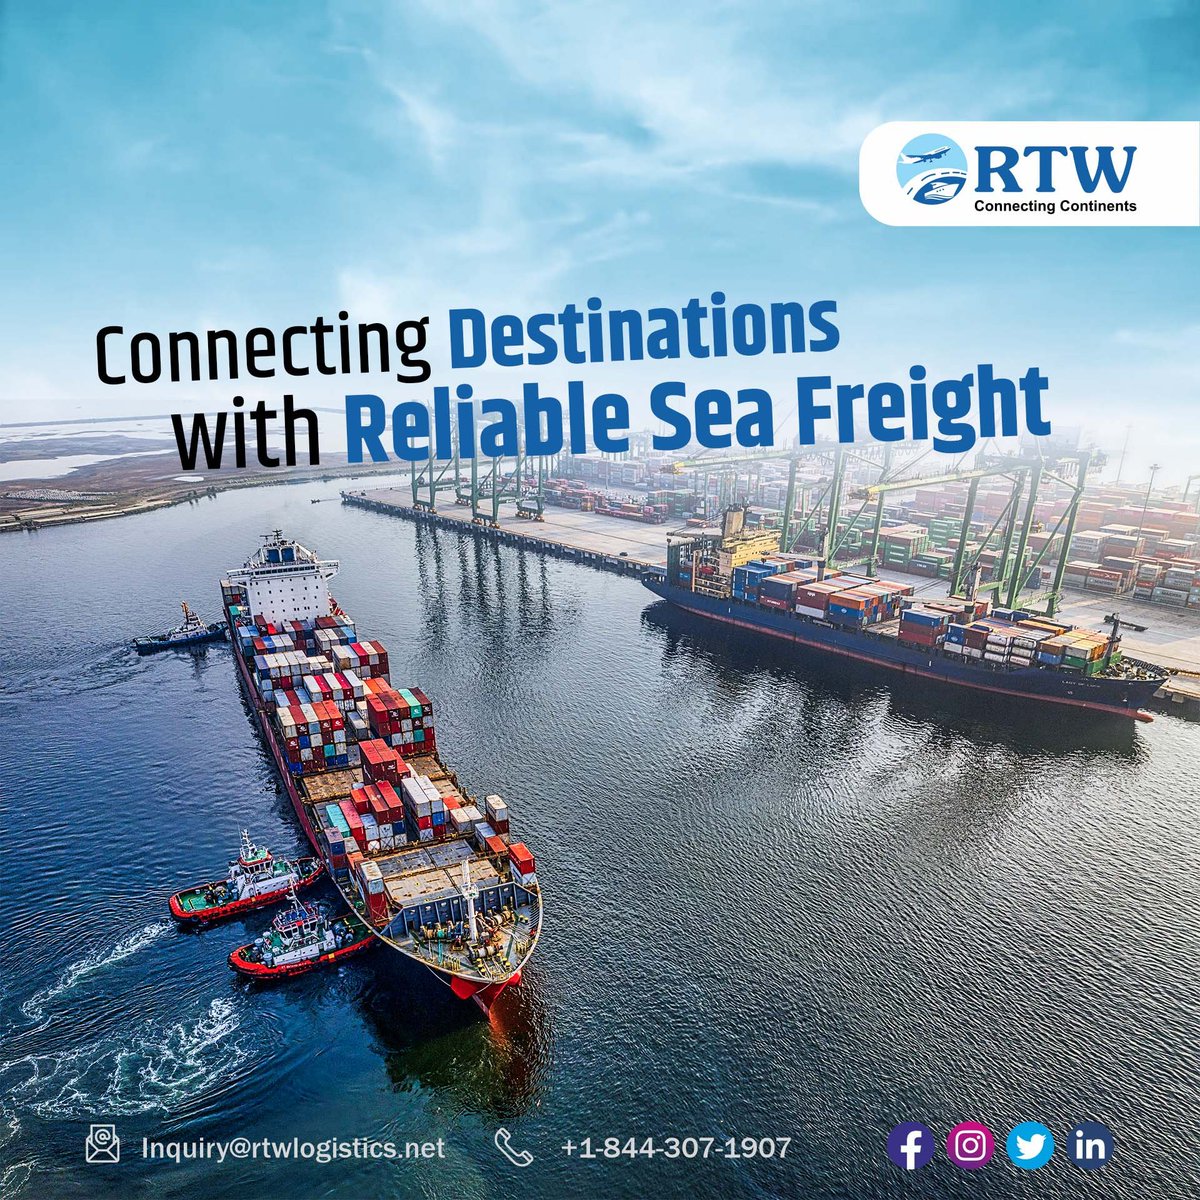 Sail into seamless logistics with our trusted sea freight services, linking destinations worldwide.

#seafreight #oceanfreight #rtw #rtwlogistics #logistics #destination #worldwide #freightservice